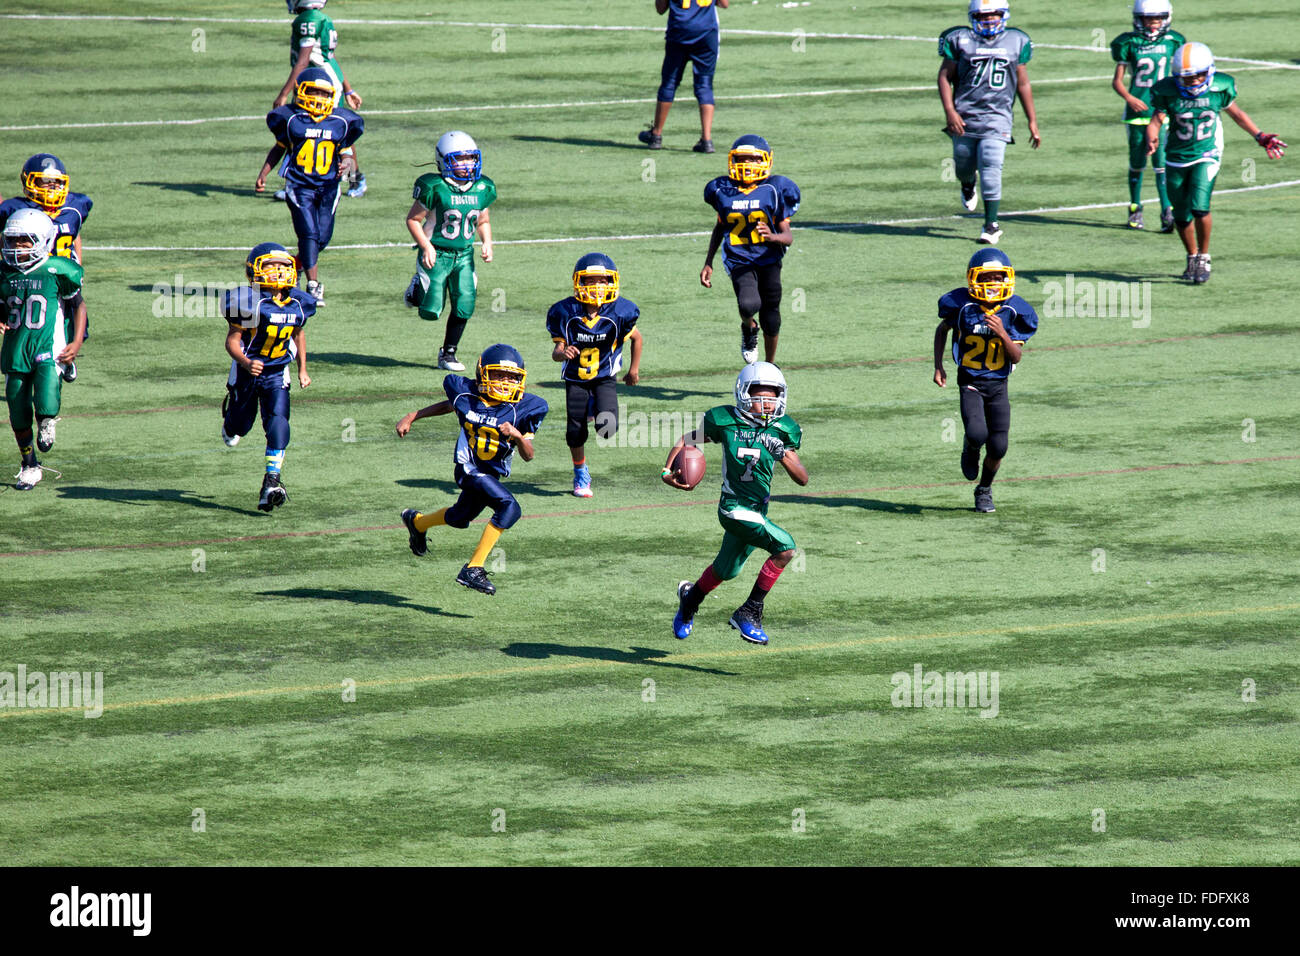 Black boy age 11 runs away from opposing players with football. McMurray Field St Paul Minnesota MN USA Stock Photo